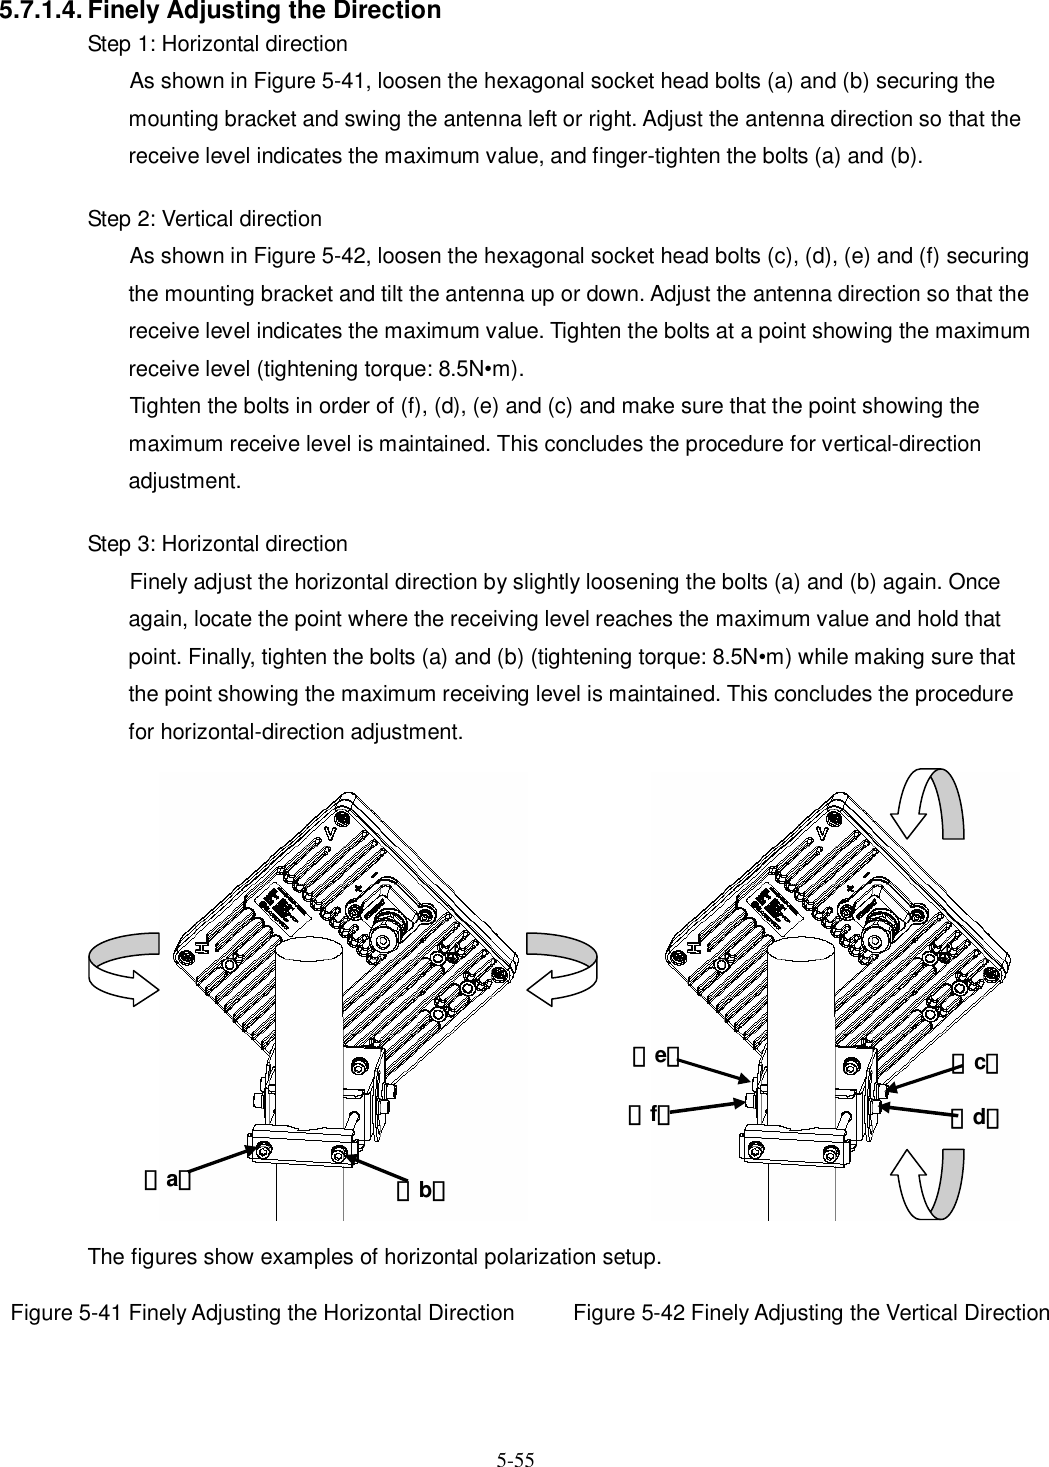   5-55 5.7.1.4. Finely Adjusting the Direction Step 1: Horizontal direction As shown in Figure 5-41, loosen the hexagonal socket head bolts (a) and (b) securing the mounting bracket and swing the antenna left or right. Adjust the antenna direction so that the receive level indicates the maximum value, and finger-tighten the bolts (a) and (b).  Step 2: Vertical direction As shown in Figure 5-42, loosen the hexagonal socket head bolts (c), (d), (e) and (f) securing the mounting bracket and tilt the antenna up or down. Adjust the antenna direction so that the receive level indicates the maximum value. Tighten the bolts at a point showing the maximum receive level (tightening torque: 8.5N•m).   Tighten the bolts in order of (f), (d), (e) and (c) and make sure that the point showing the maximum receive level is maintained. This concludes the procedure for vertical-direction adjustment.  Step 3: Horizontal direction Finely adjust the horizontal direction by slightly loosening the bolts (a) and (b) again. Once again, locate the point where the receiving level reaches the maximum value and hold that point. Finally, tighten the bolts (a) and (b) (tightening torque: 8.5N•m) while making sure that the point showing the maximum receiving level is maintained. This concludes the procedure for horizontal-direction adjustment. The figures show examples of horizontal polarization setup.  Figure 5-41 Finely Adjusting the Horizontal Direction Figure 5-42 Finely Adjusting the Vertical Direction （a） （b） （d） （c） （e） （f） 